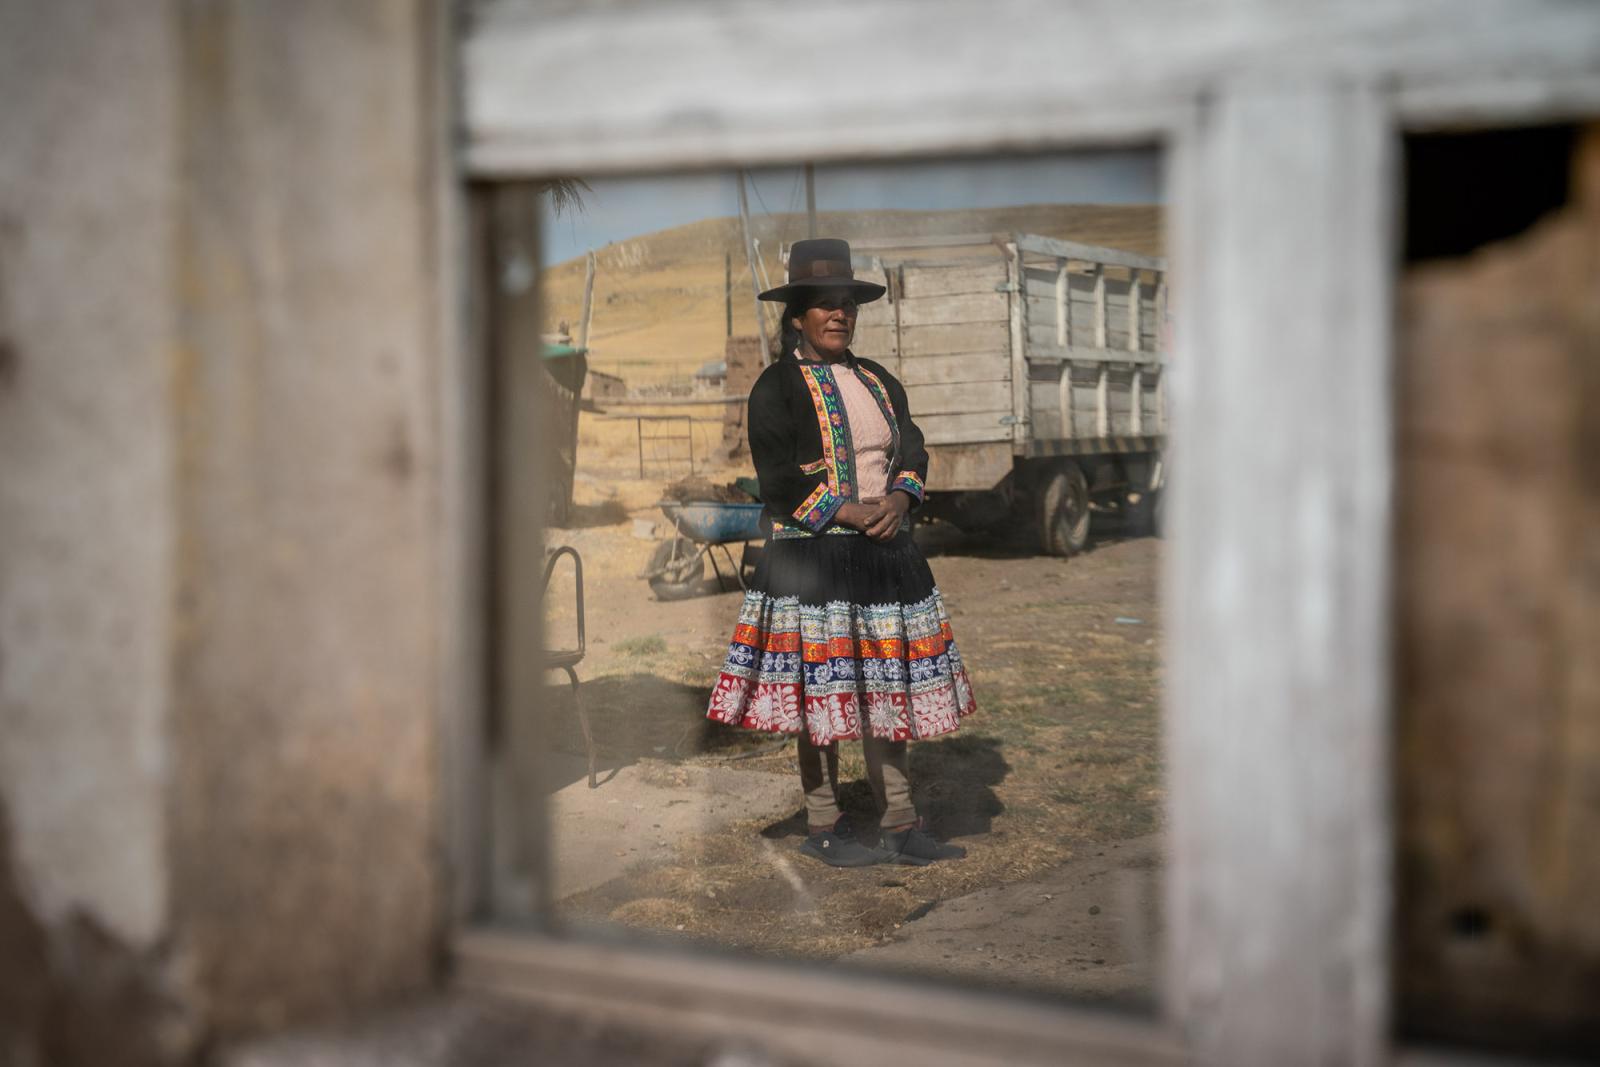 &quot;At dawn this place is...isa community in Espinar, Peru.